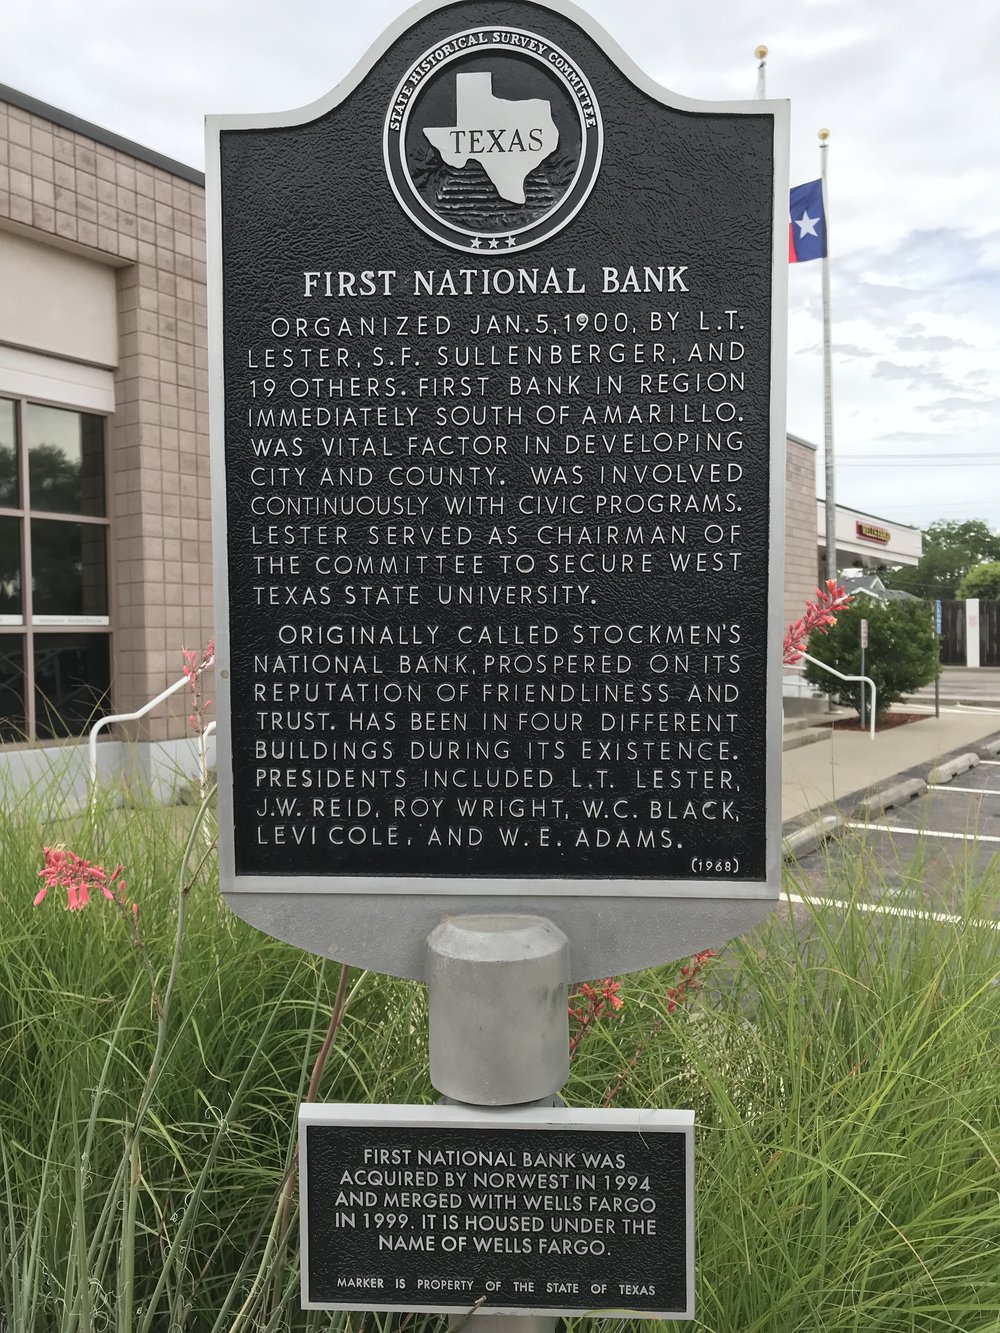 1780: First National Bank